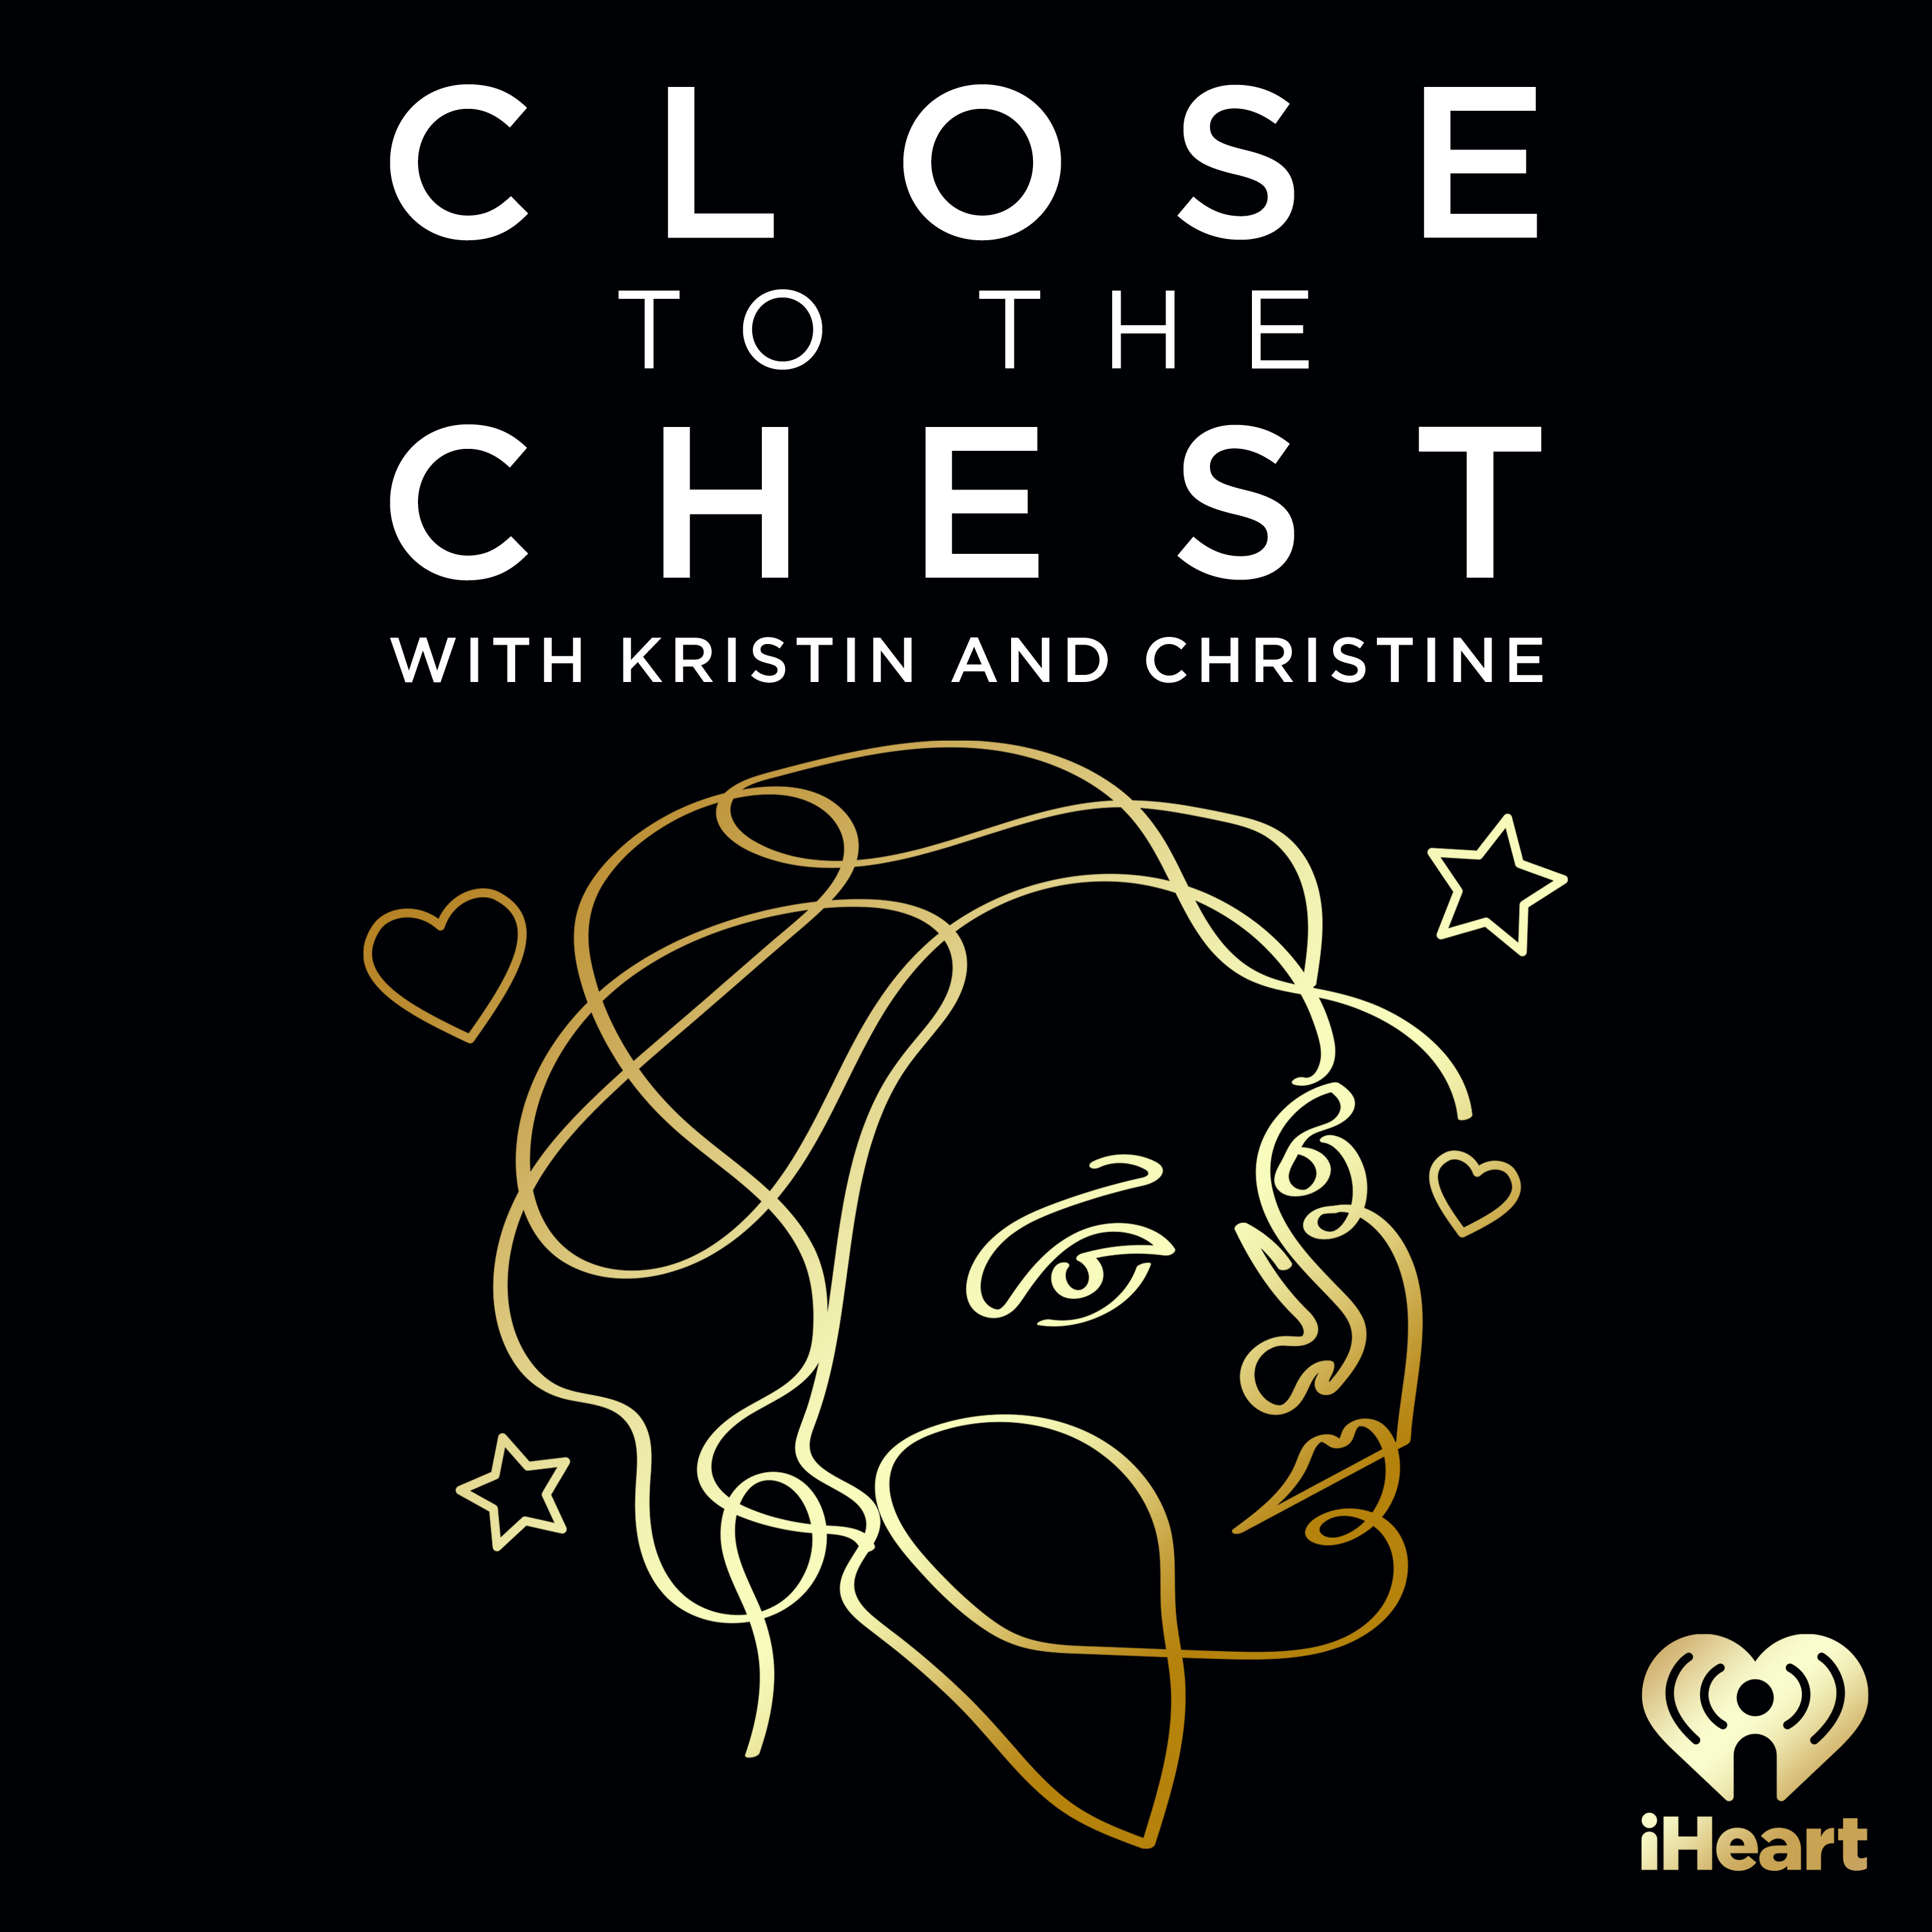 Close to the Chest with Kristin and Christine